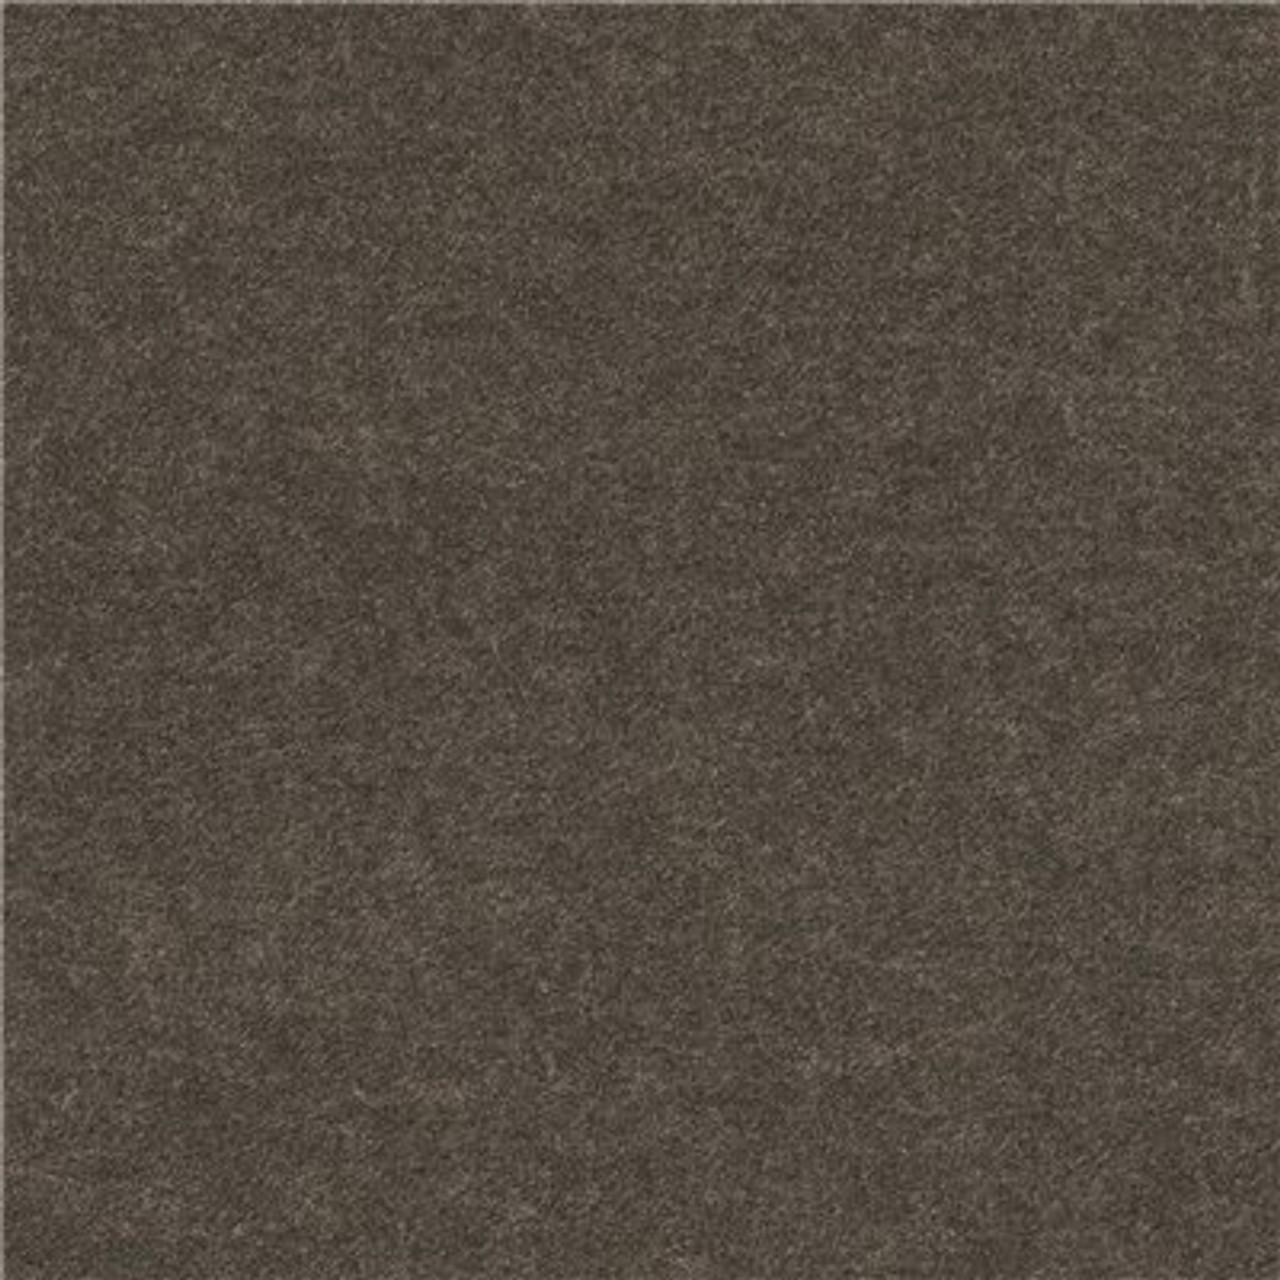 Foss Peel And Stick First Impressions Flat Black Ice 24 In. X 24 In. Commercial Carpet Tile (15 Tiles/Case)